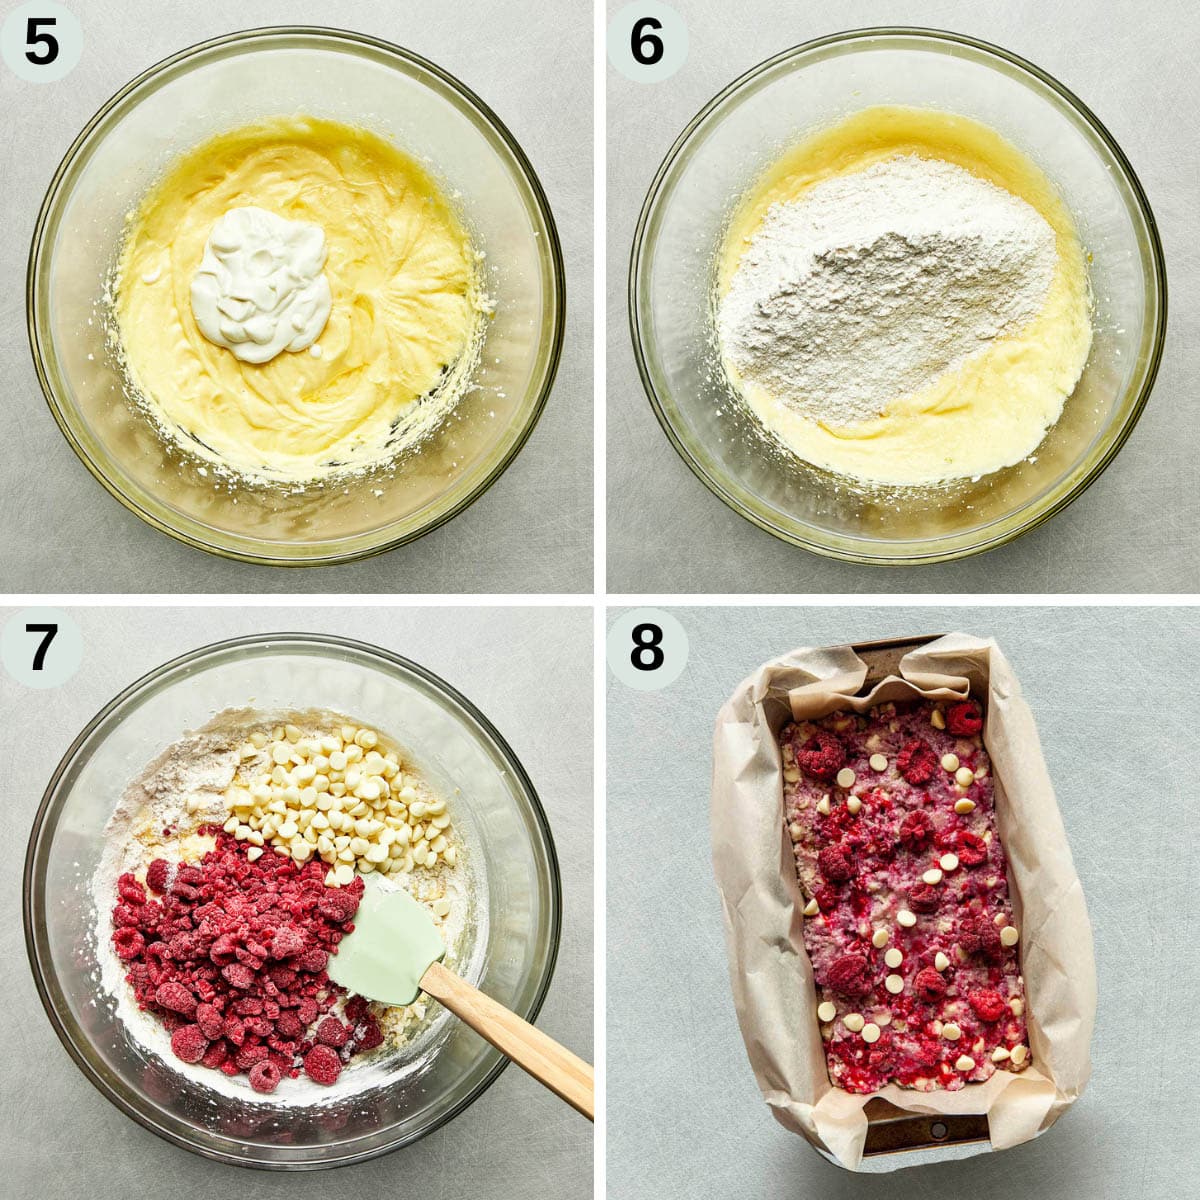 Process shots five through eight of how to make a white chocolate and raspberry loaf cake.